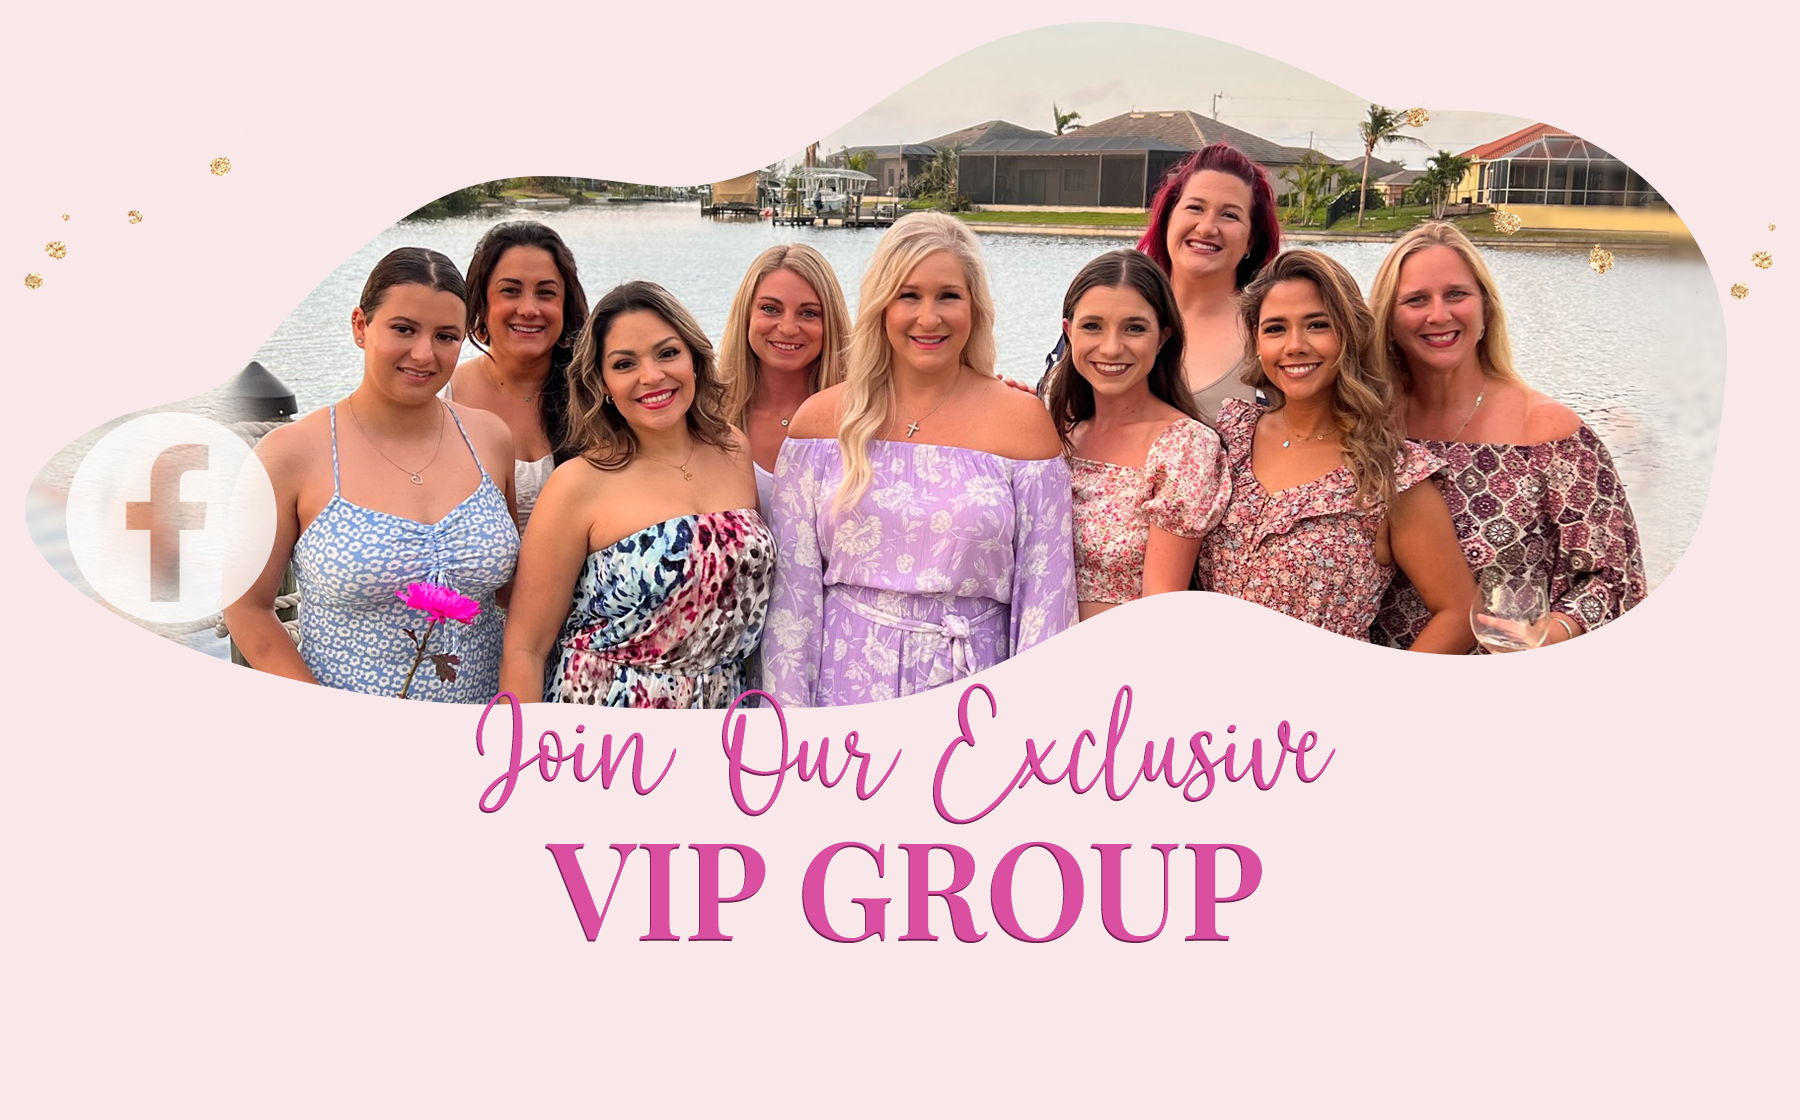 Join our exclusive VIP group